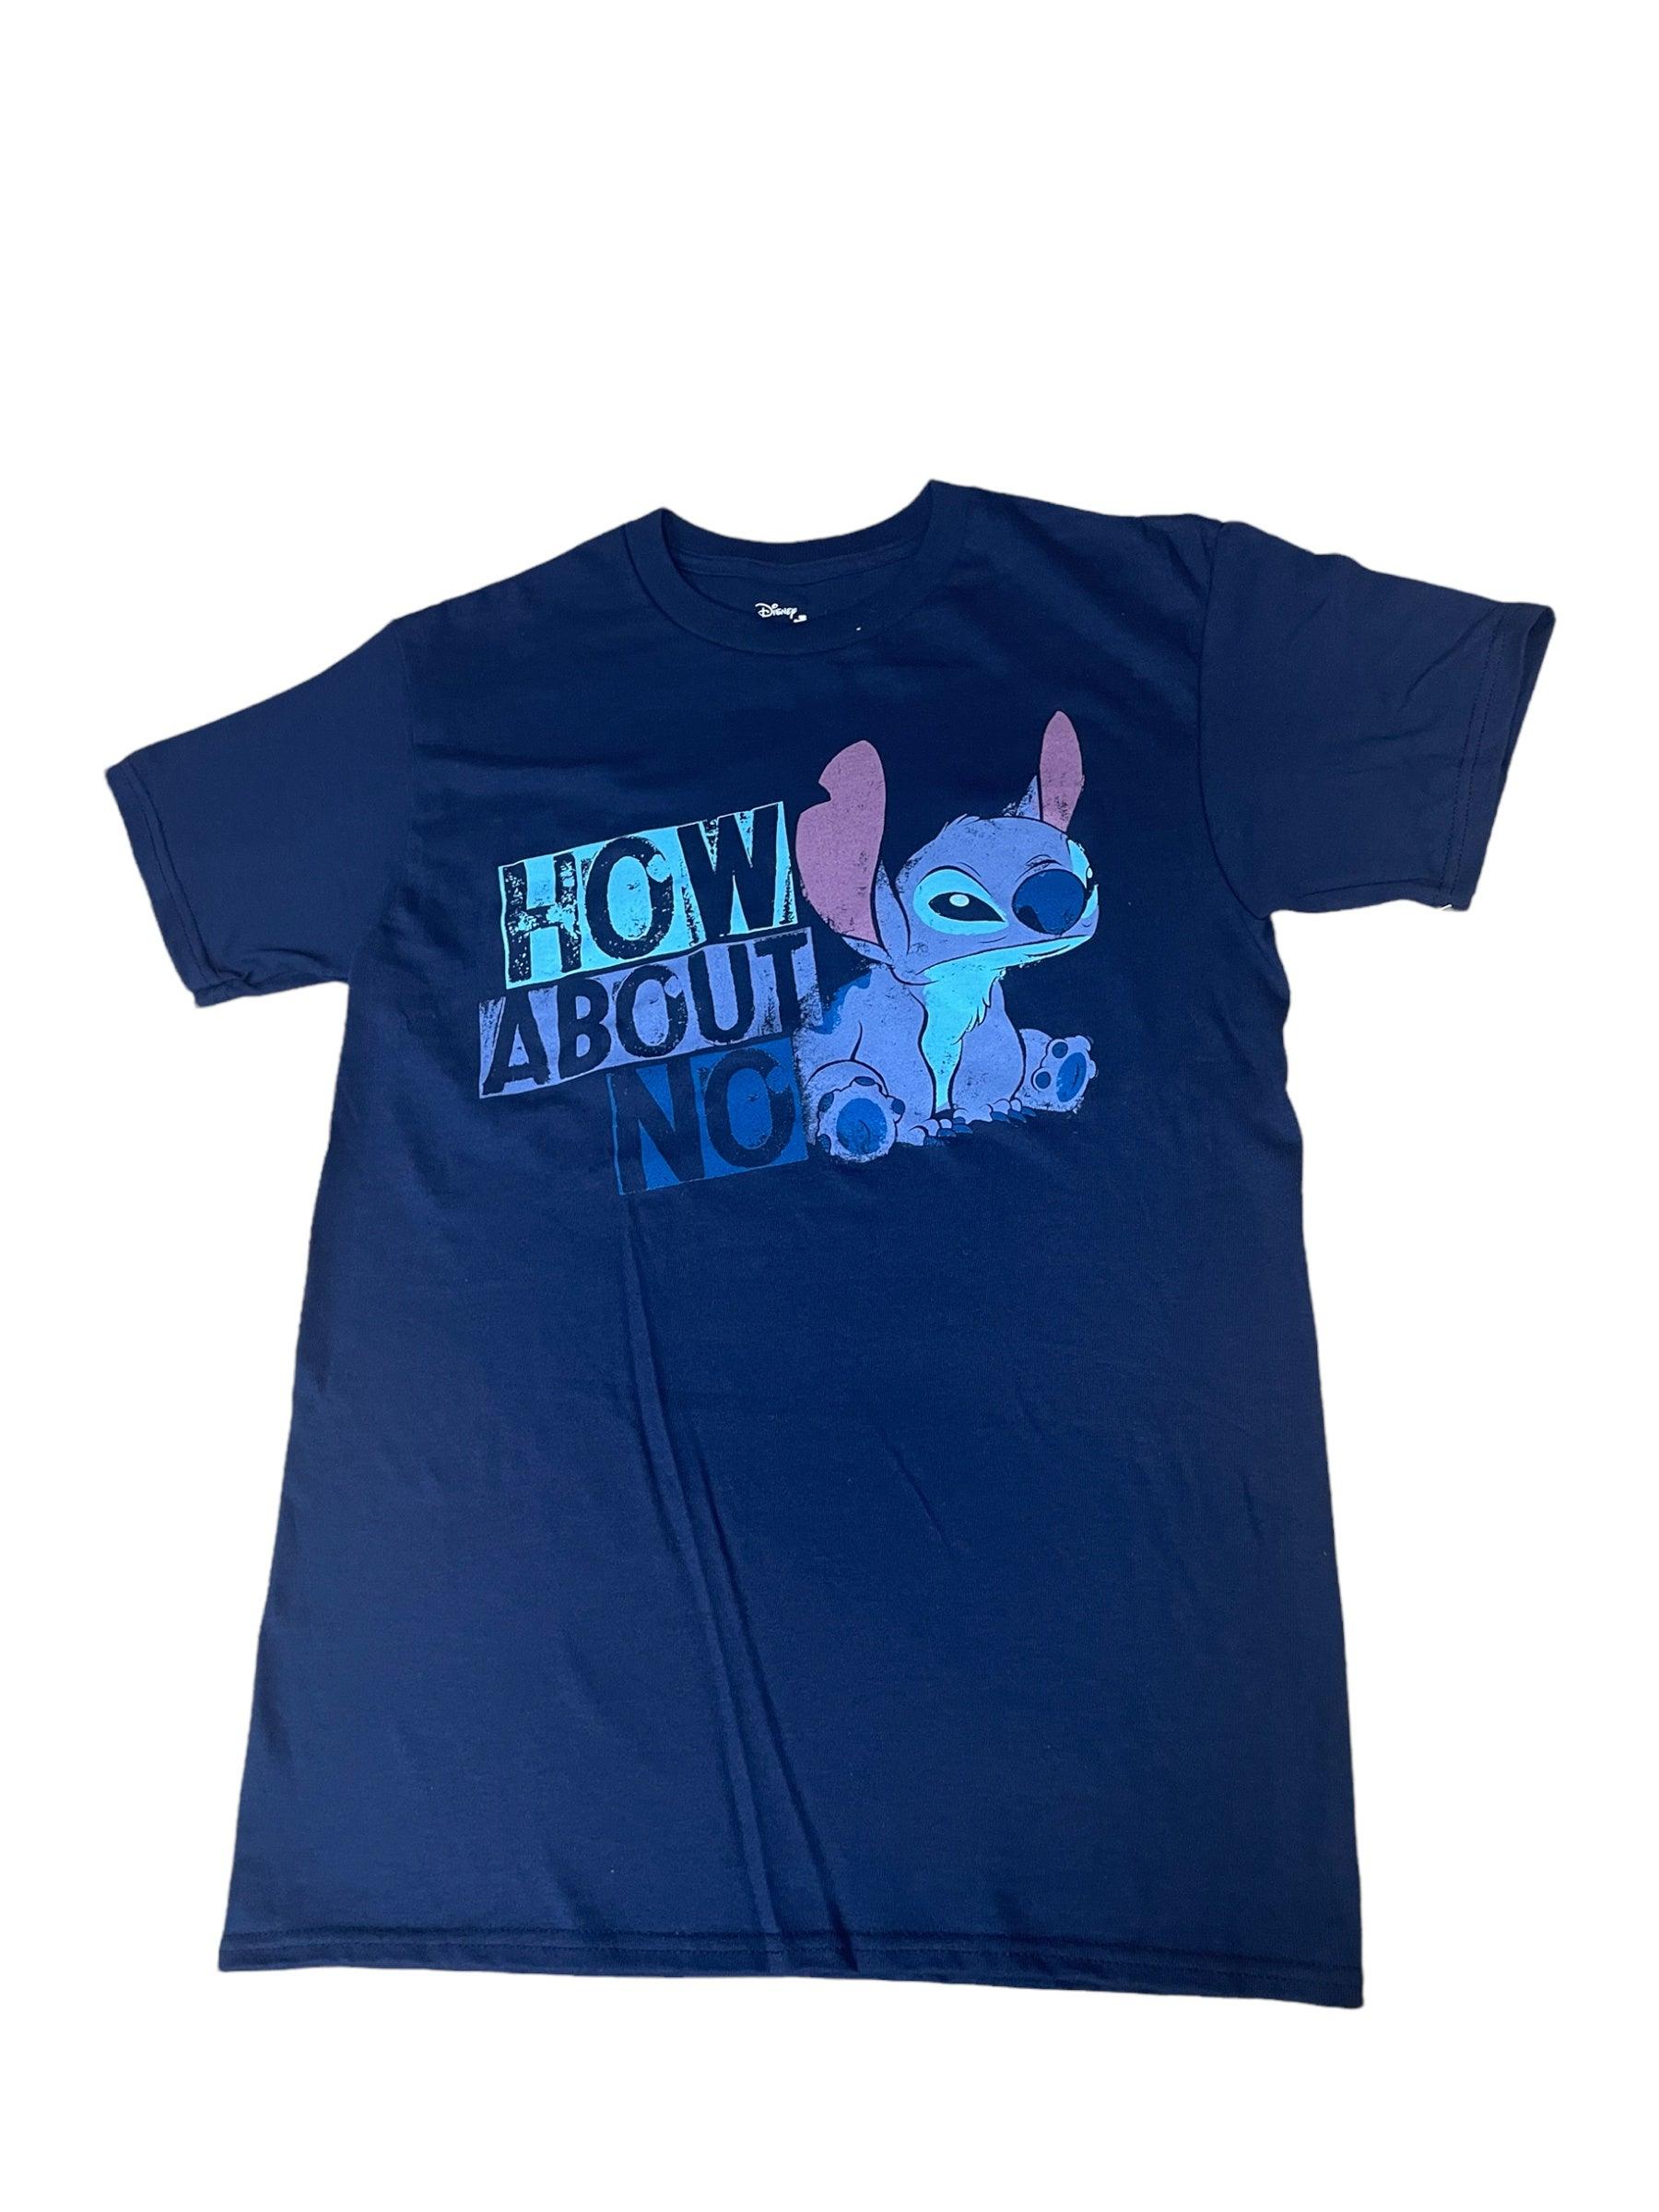 Stitch How About No Navy Tee